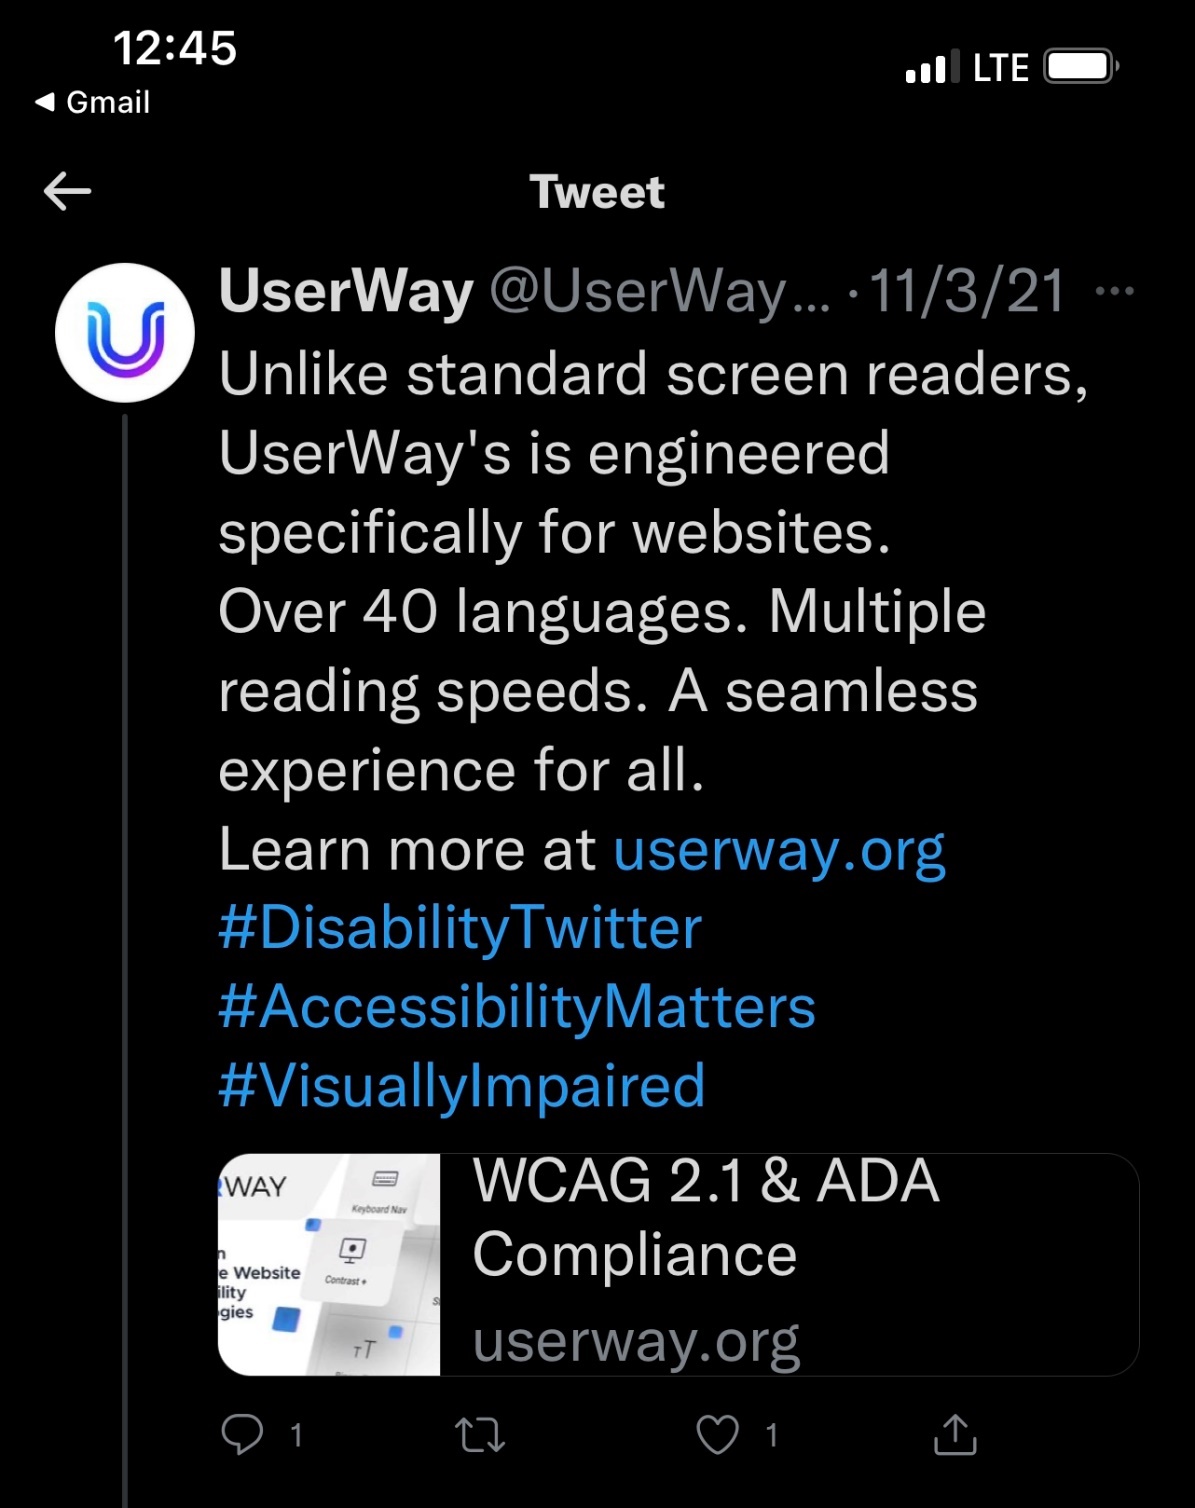 UserWay @UserWay - 11/3/21  Unlike standard screen readers, UserWay's is engineered specifically for websites.  Over 40 languages.  Multiple reading speeds.  A seamless experience for all.   Learn more at userway.org #DisabilityTwitter #AccessibilityMatters #VisuallyImpaired